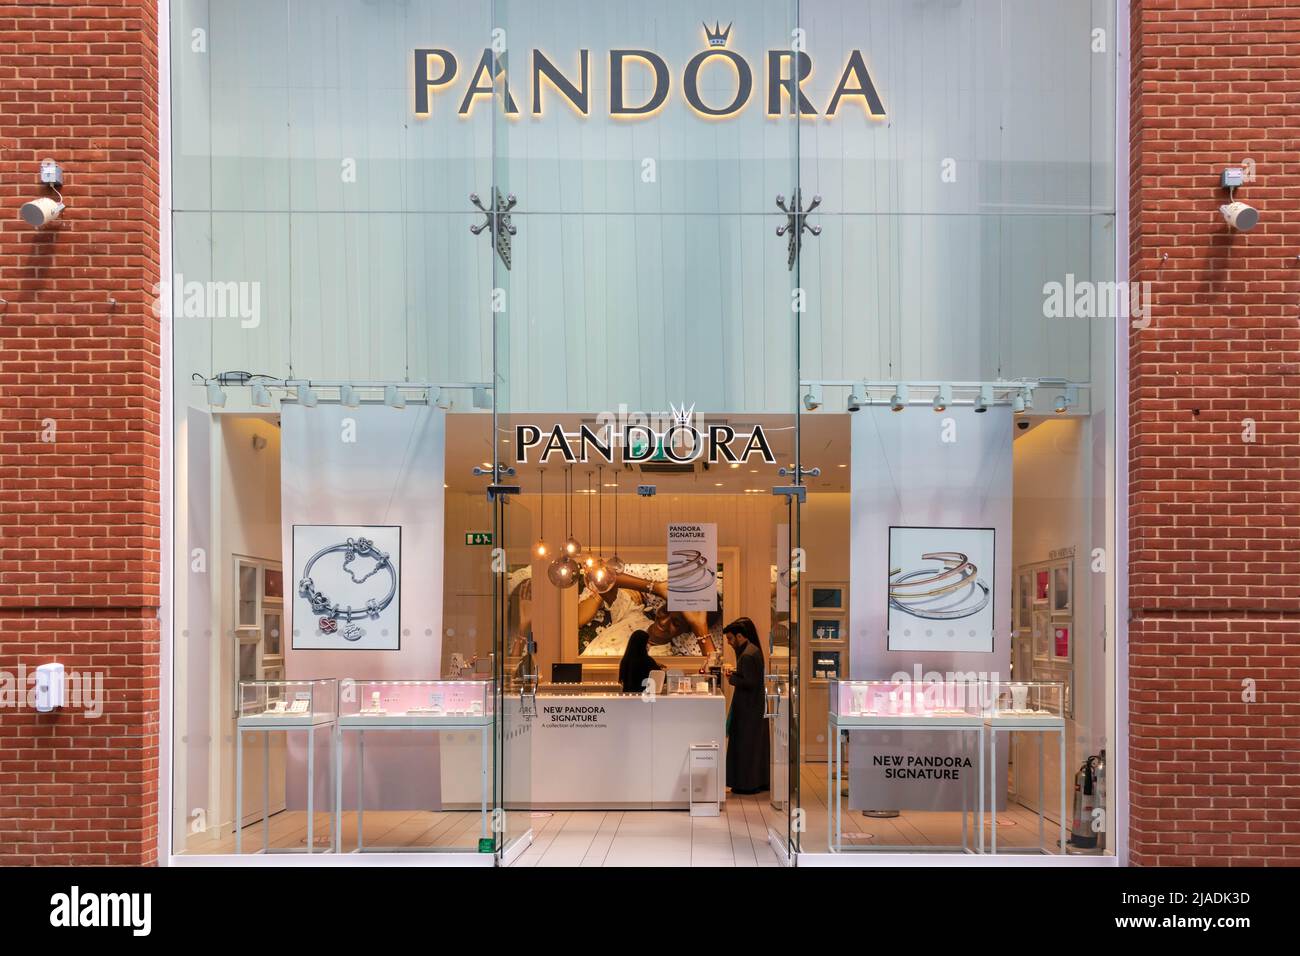 High Wycombe, England - July 21st 2021: Pandora Jewellery shop in the Eden shopping centre. The chain is Danish owned. Stock Photo